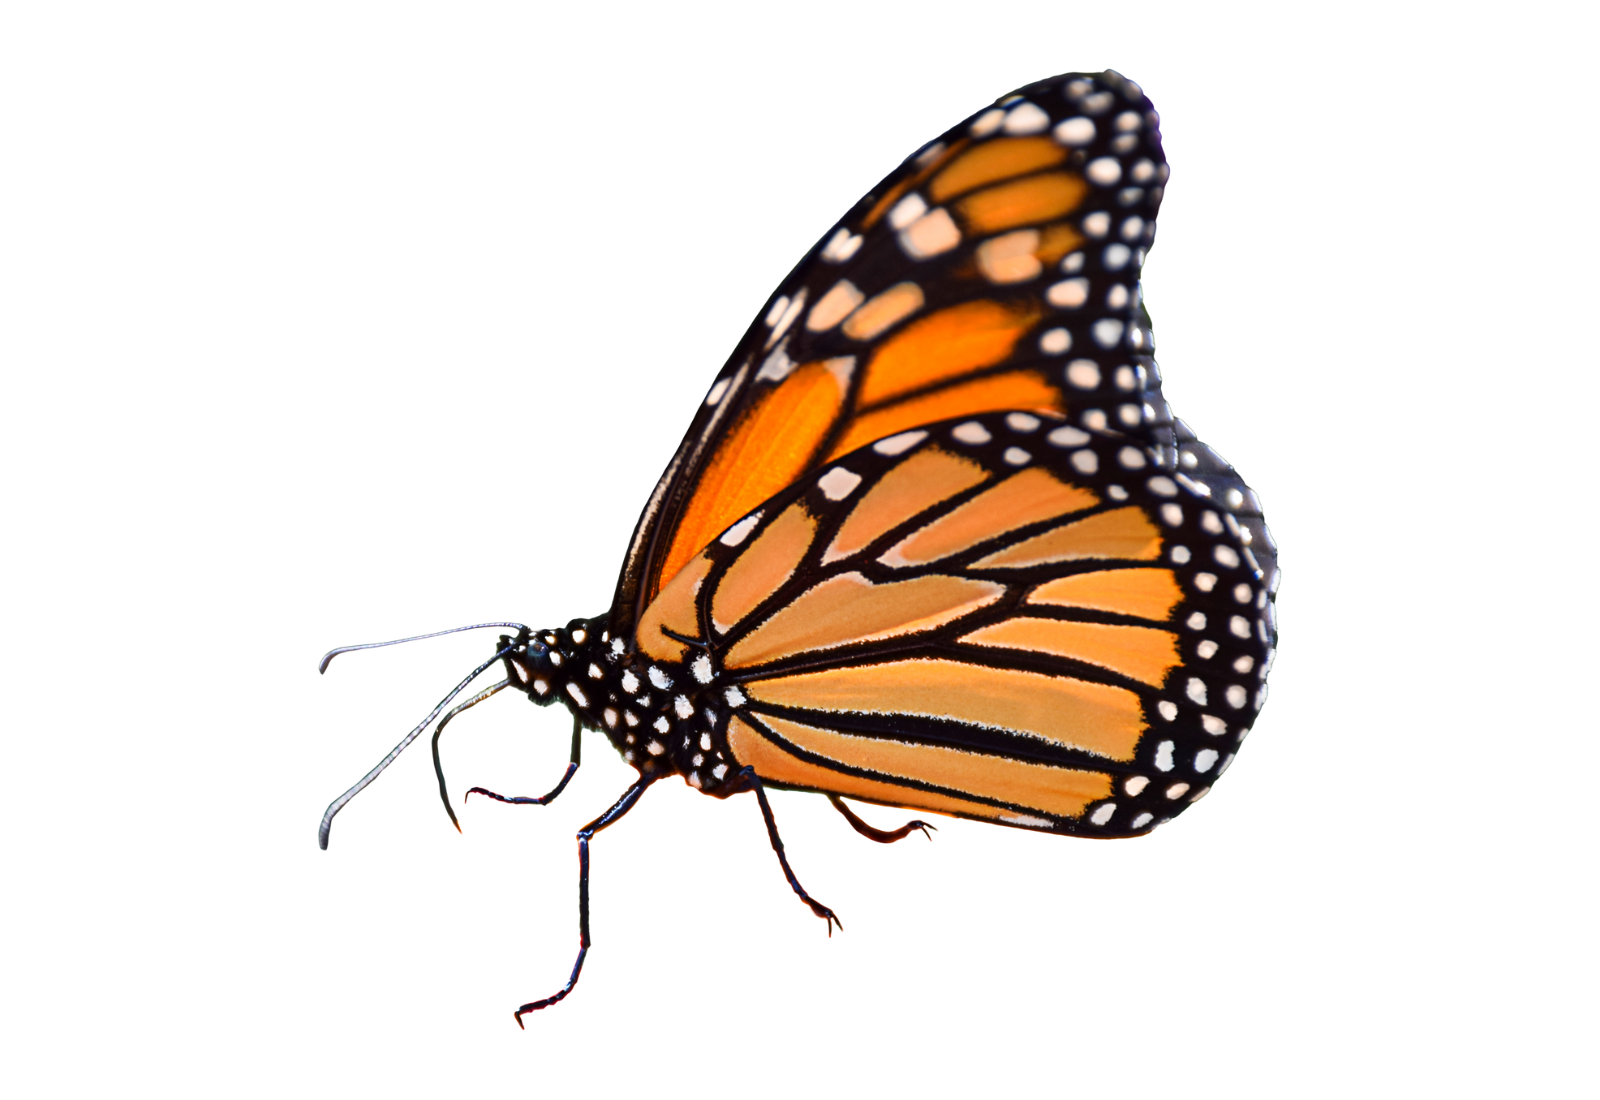 Image of a monarch butterfly